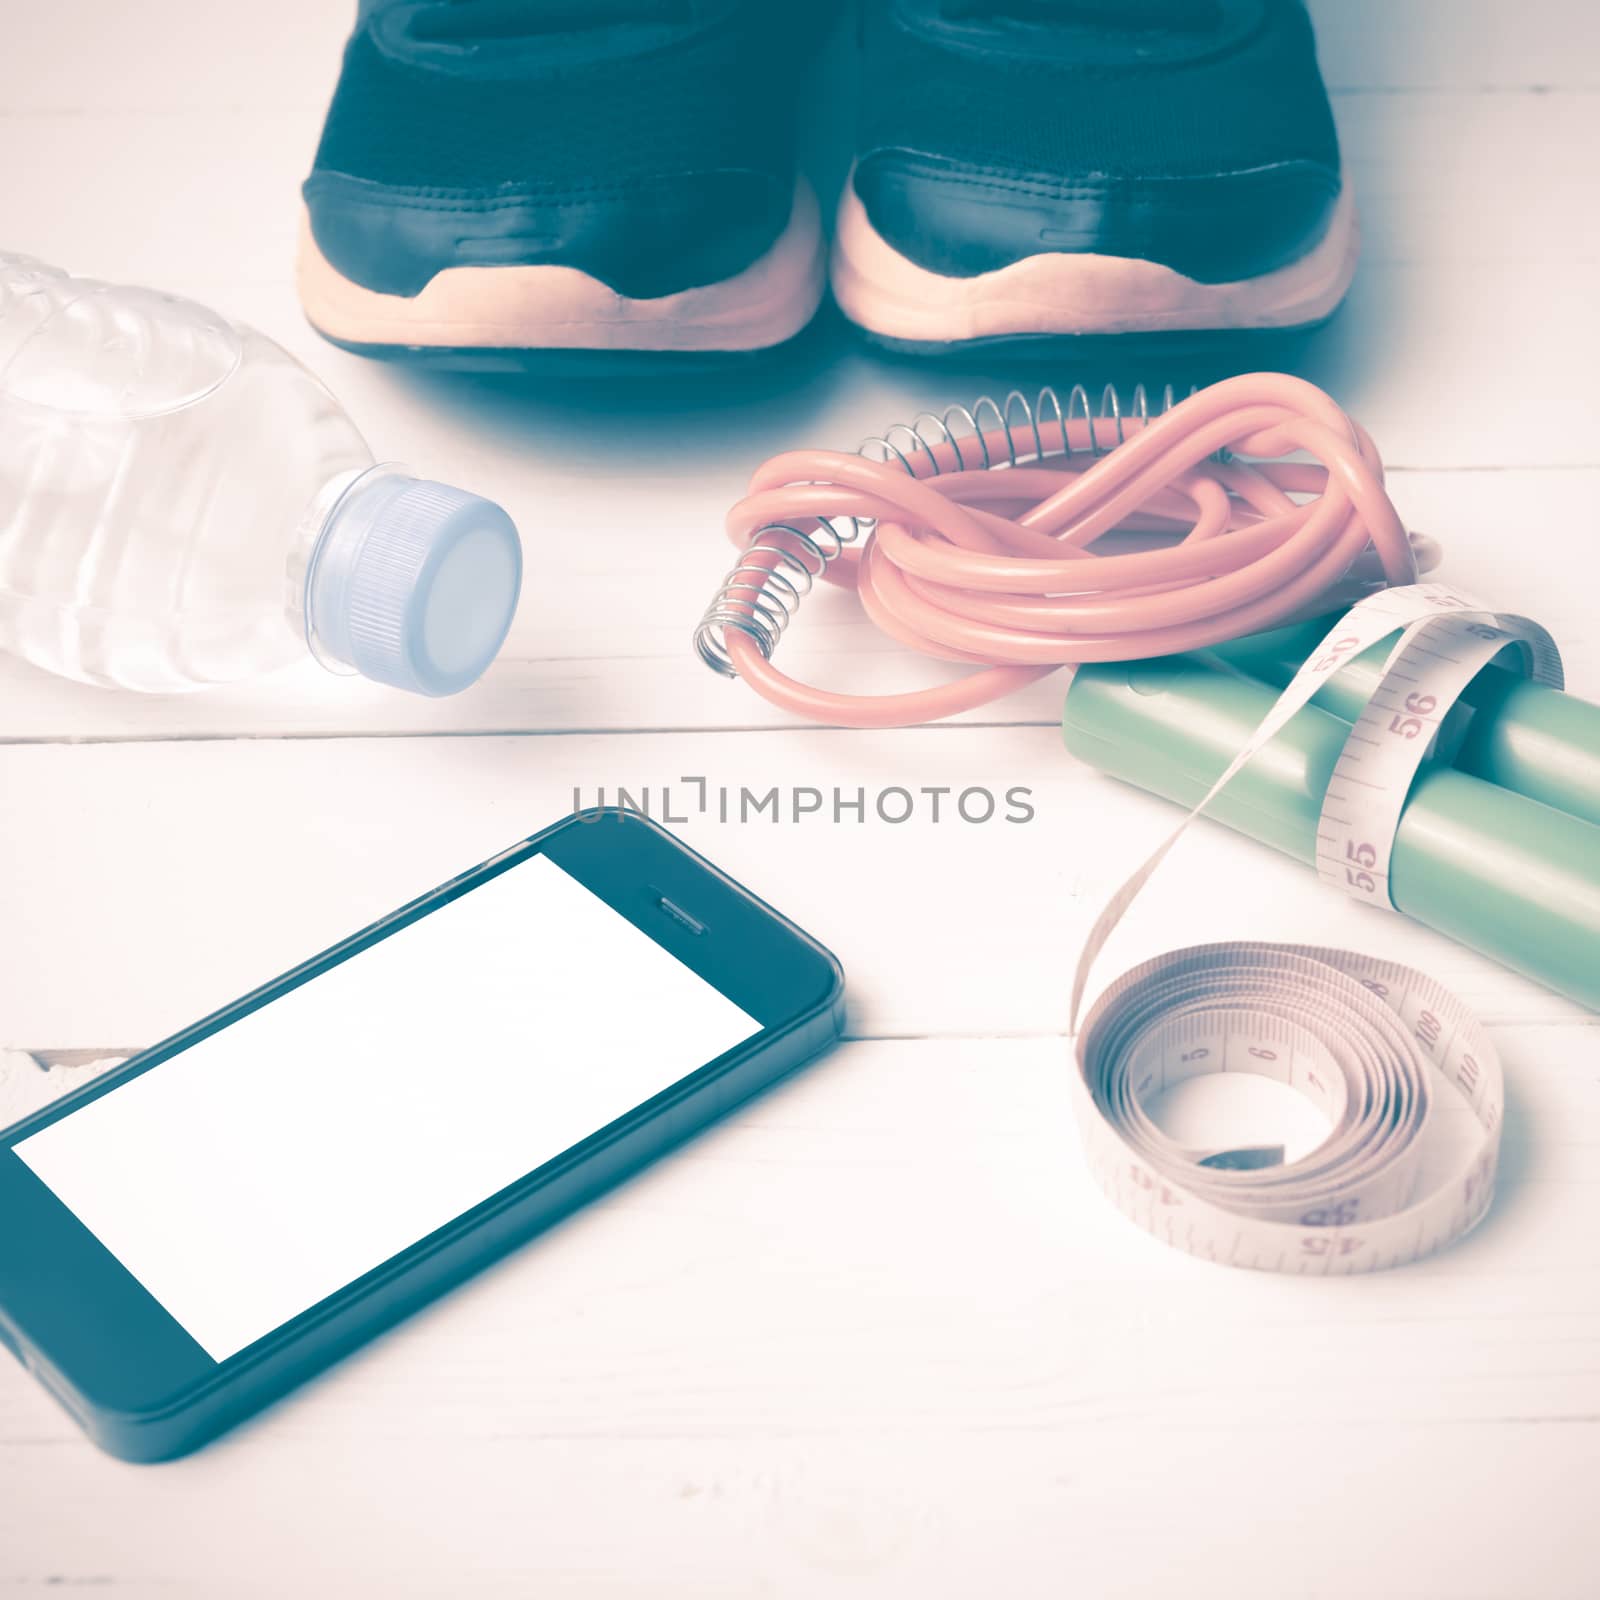 fitness equipment : running shoes,jumping rope,drinking water,measuring tape and phone on white wood table vintage style